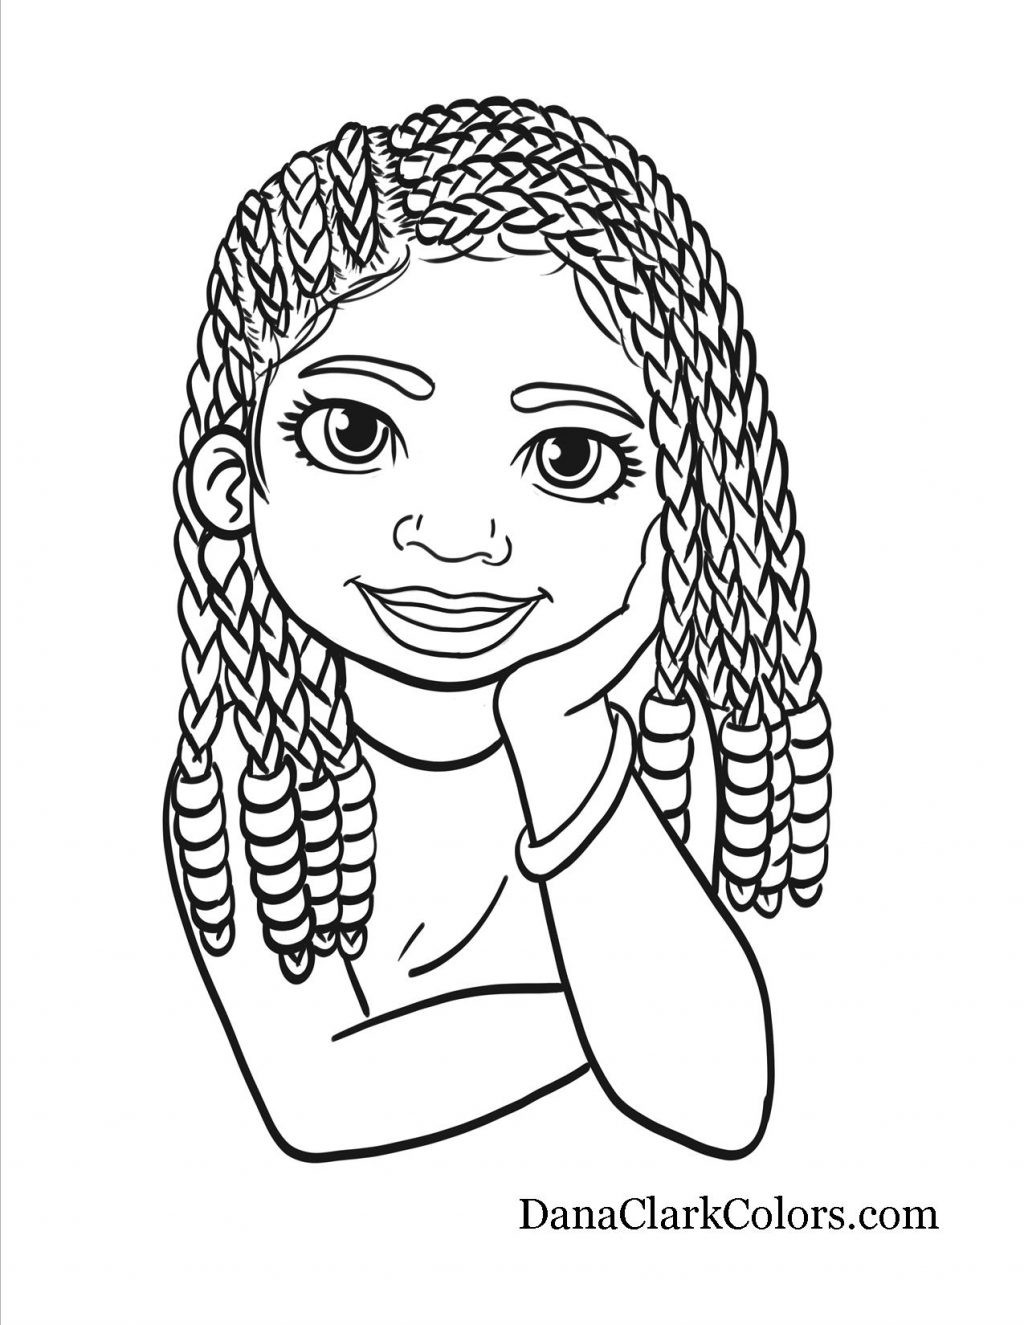 African American Boys Coloring Sheets
 African American Girl Coloring Pages Collection